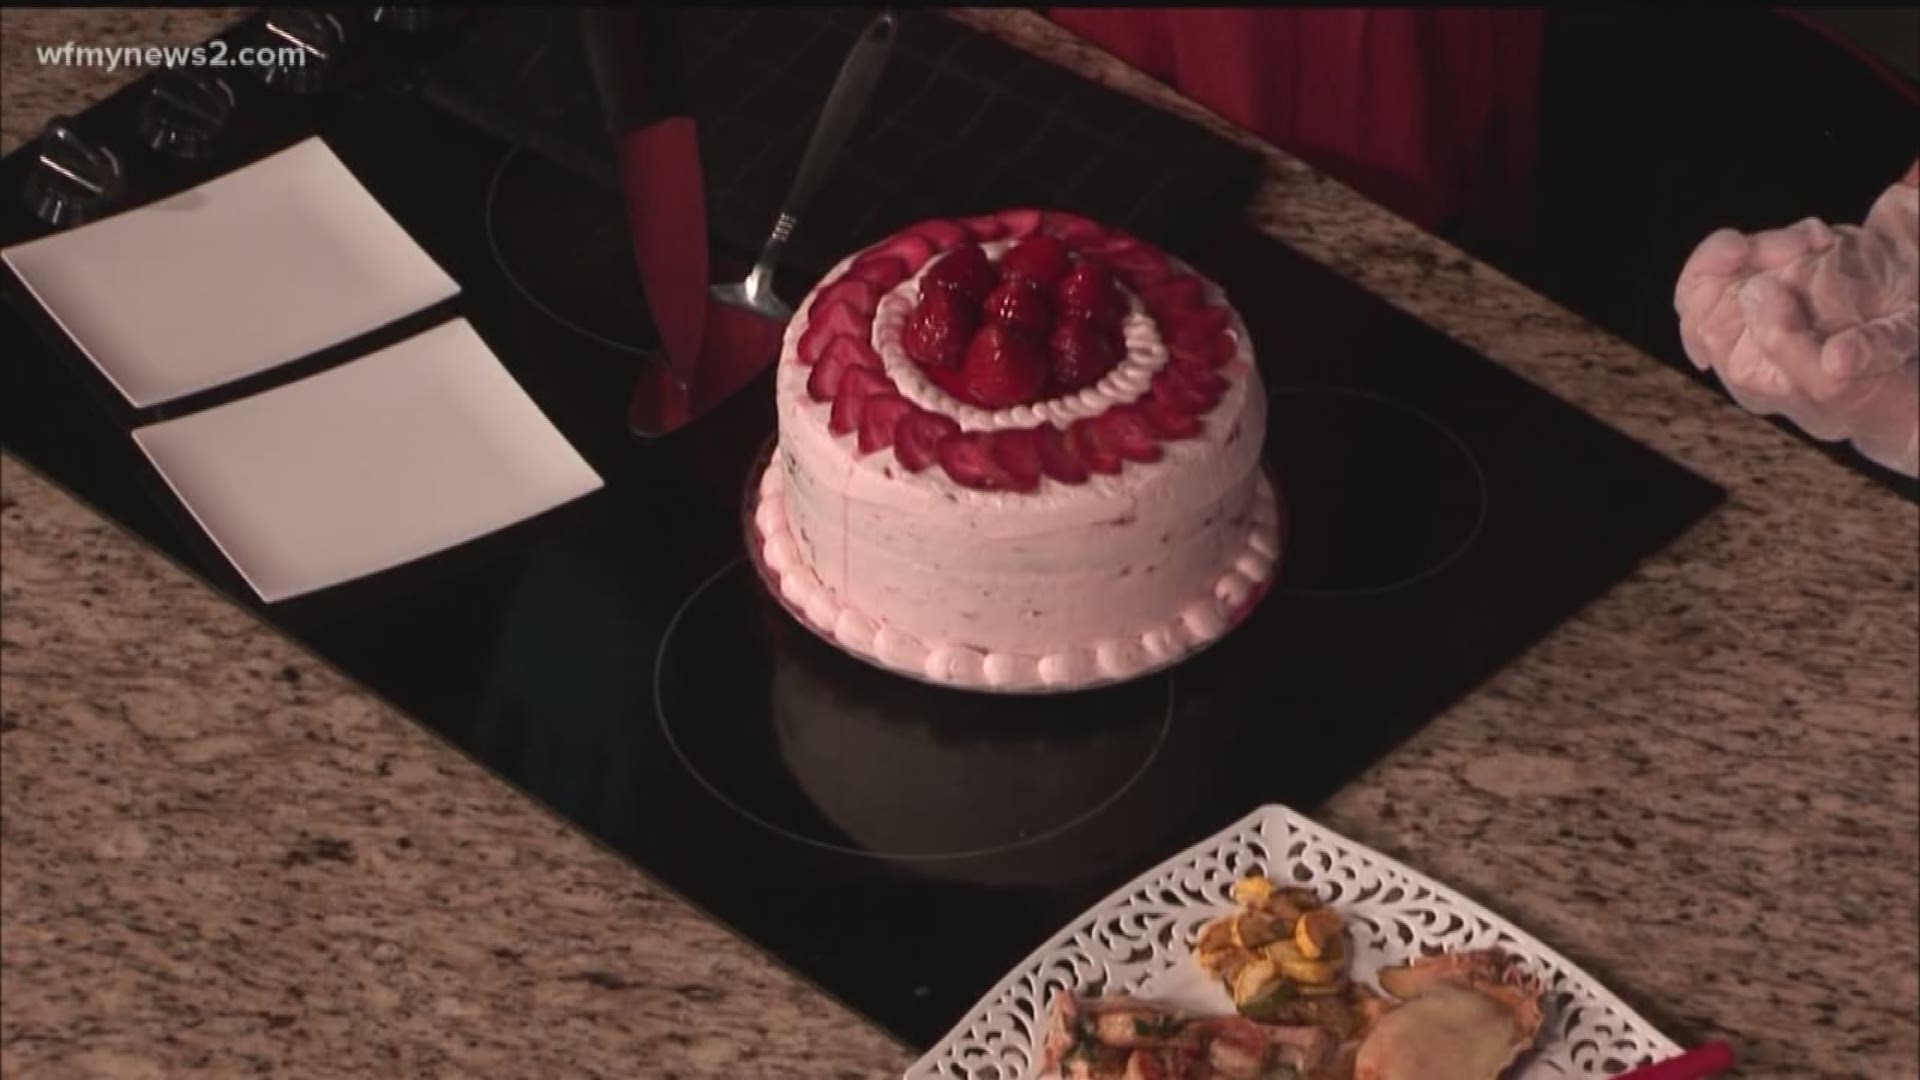 This dessert is killer. A strawberry cream cheese layer cake, and we've got the recipe right here on WFMY.